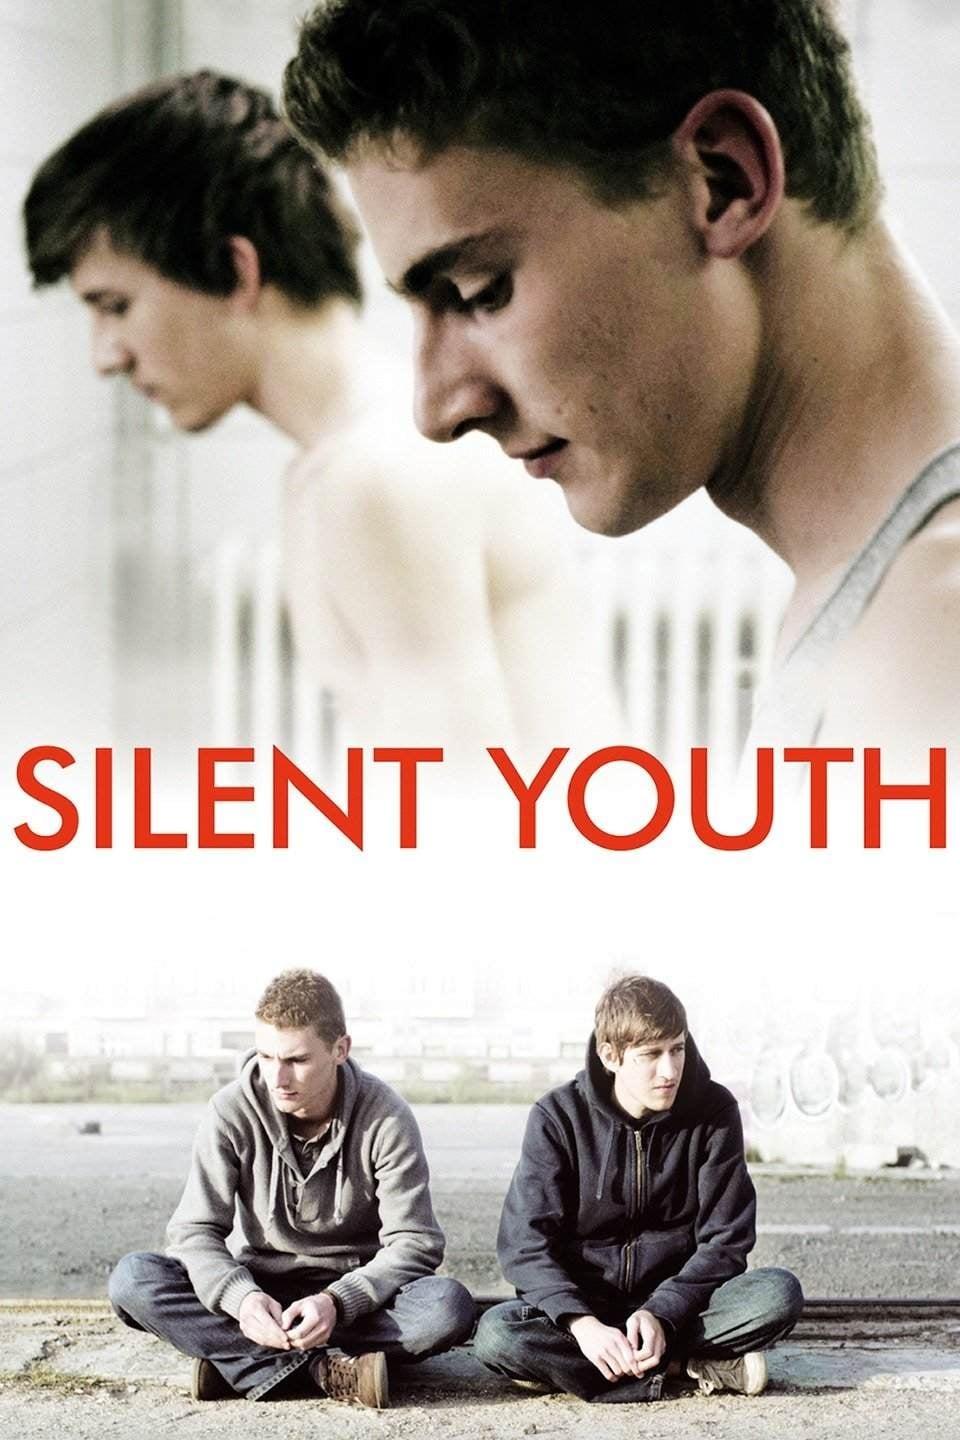 Silent Youth poster